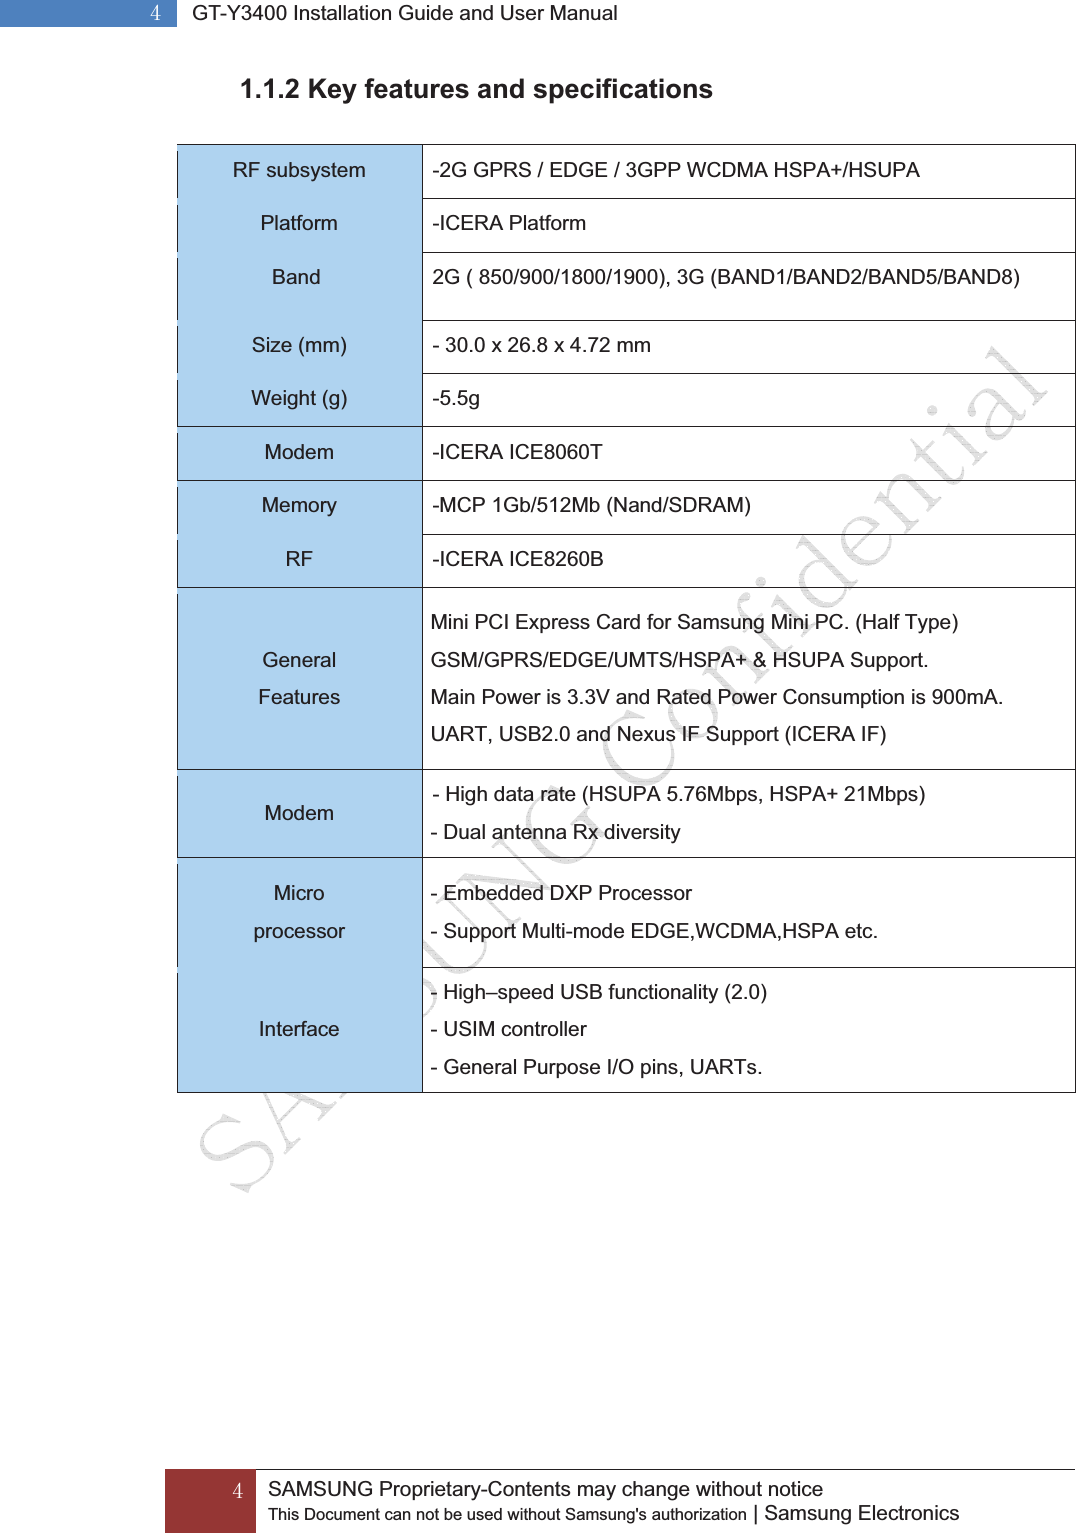 G[GGSAMSUNG Proprietary-Contents may change without notice This Document can not be used without Samsung&apos;s authorization | Samsung Electronics G[G GT-Y3400 Installation Guide and User ManualG1.1.2 Key features and specifications GRF subsystem  -2G GPRS / EDGE / 3GPP WCDMA HSPA+/HSUPA Platform   -ICERA Platform Band     2G ( 850/900/1800/1900), 3G (BAND1/BAND2/BAND5/BAND8) Size (mm)  - 30.0 x 26.8 x 4.72 mm Weight (g)  -5.5g Modem -ICERA ICE8060T Memory -MCP 1Gb/512Mb (Nand/SDRAM) RF -ICERA ICE8260B General  Features Mini PCI Express Card for Samsung Mini PC. (Half Type) GSM/GPRS/EDGE/UMTS/HSPA+ &amp; HSUPA Support. Main Power is 3.3V and Rated Power Consumption is 900mA. UART, USB2.0 and Nexus IF Support (ICERA IF) Modem  - High data rate (HSUPA 5.76Mbps, HSPA+ 21Mbps) - Dual antenna Rx diversity Micro processor - Embedded DXP Processor - Support Multi-mode EDGE,WCDMA,HSPA etc. Interface - High–speed USB functionality (2.0) - USIM controller - General Purpose I/O pins, UARTs.  